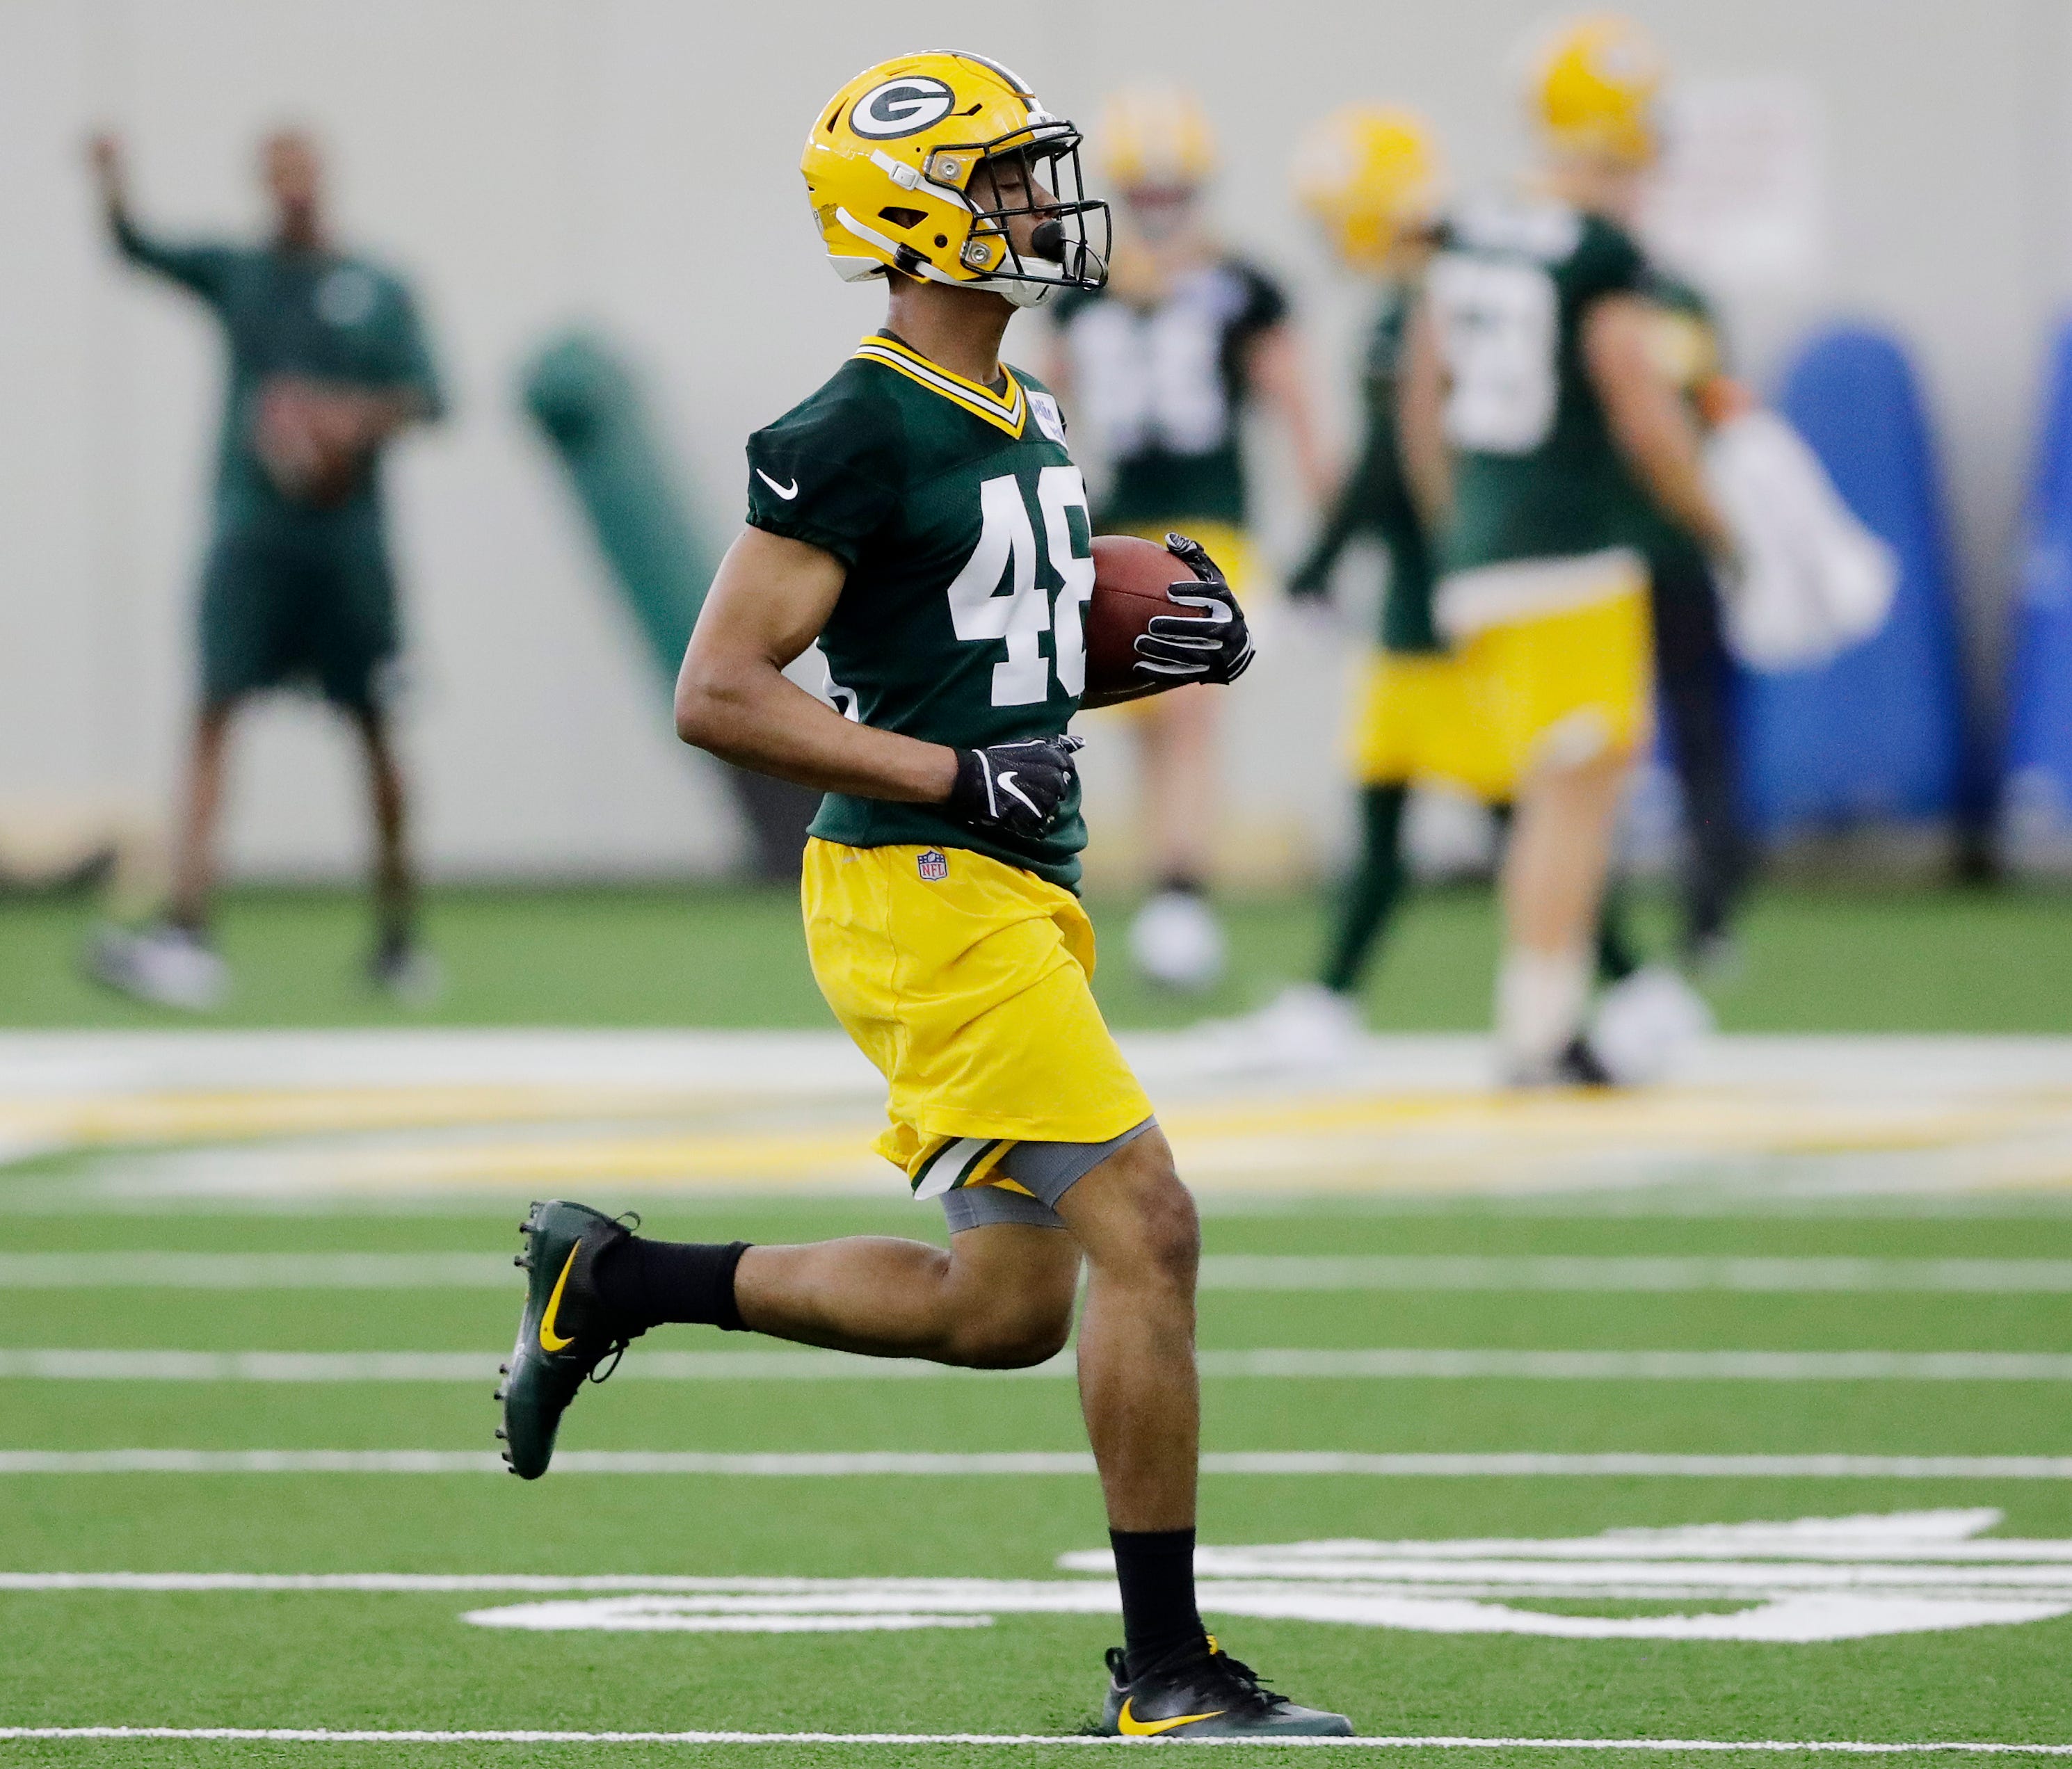 Green Bay Packers cornerback Kabion Ento (48) during practice at rookie minicamp at the Don Hutson Center on Friday, May 3, 2019 in Ashwaubenon, Wis.
Adam Wesley/USA TODAY NETWORK-Wis